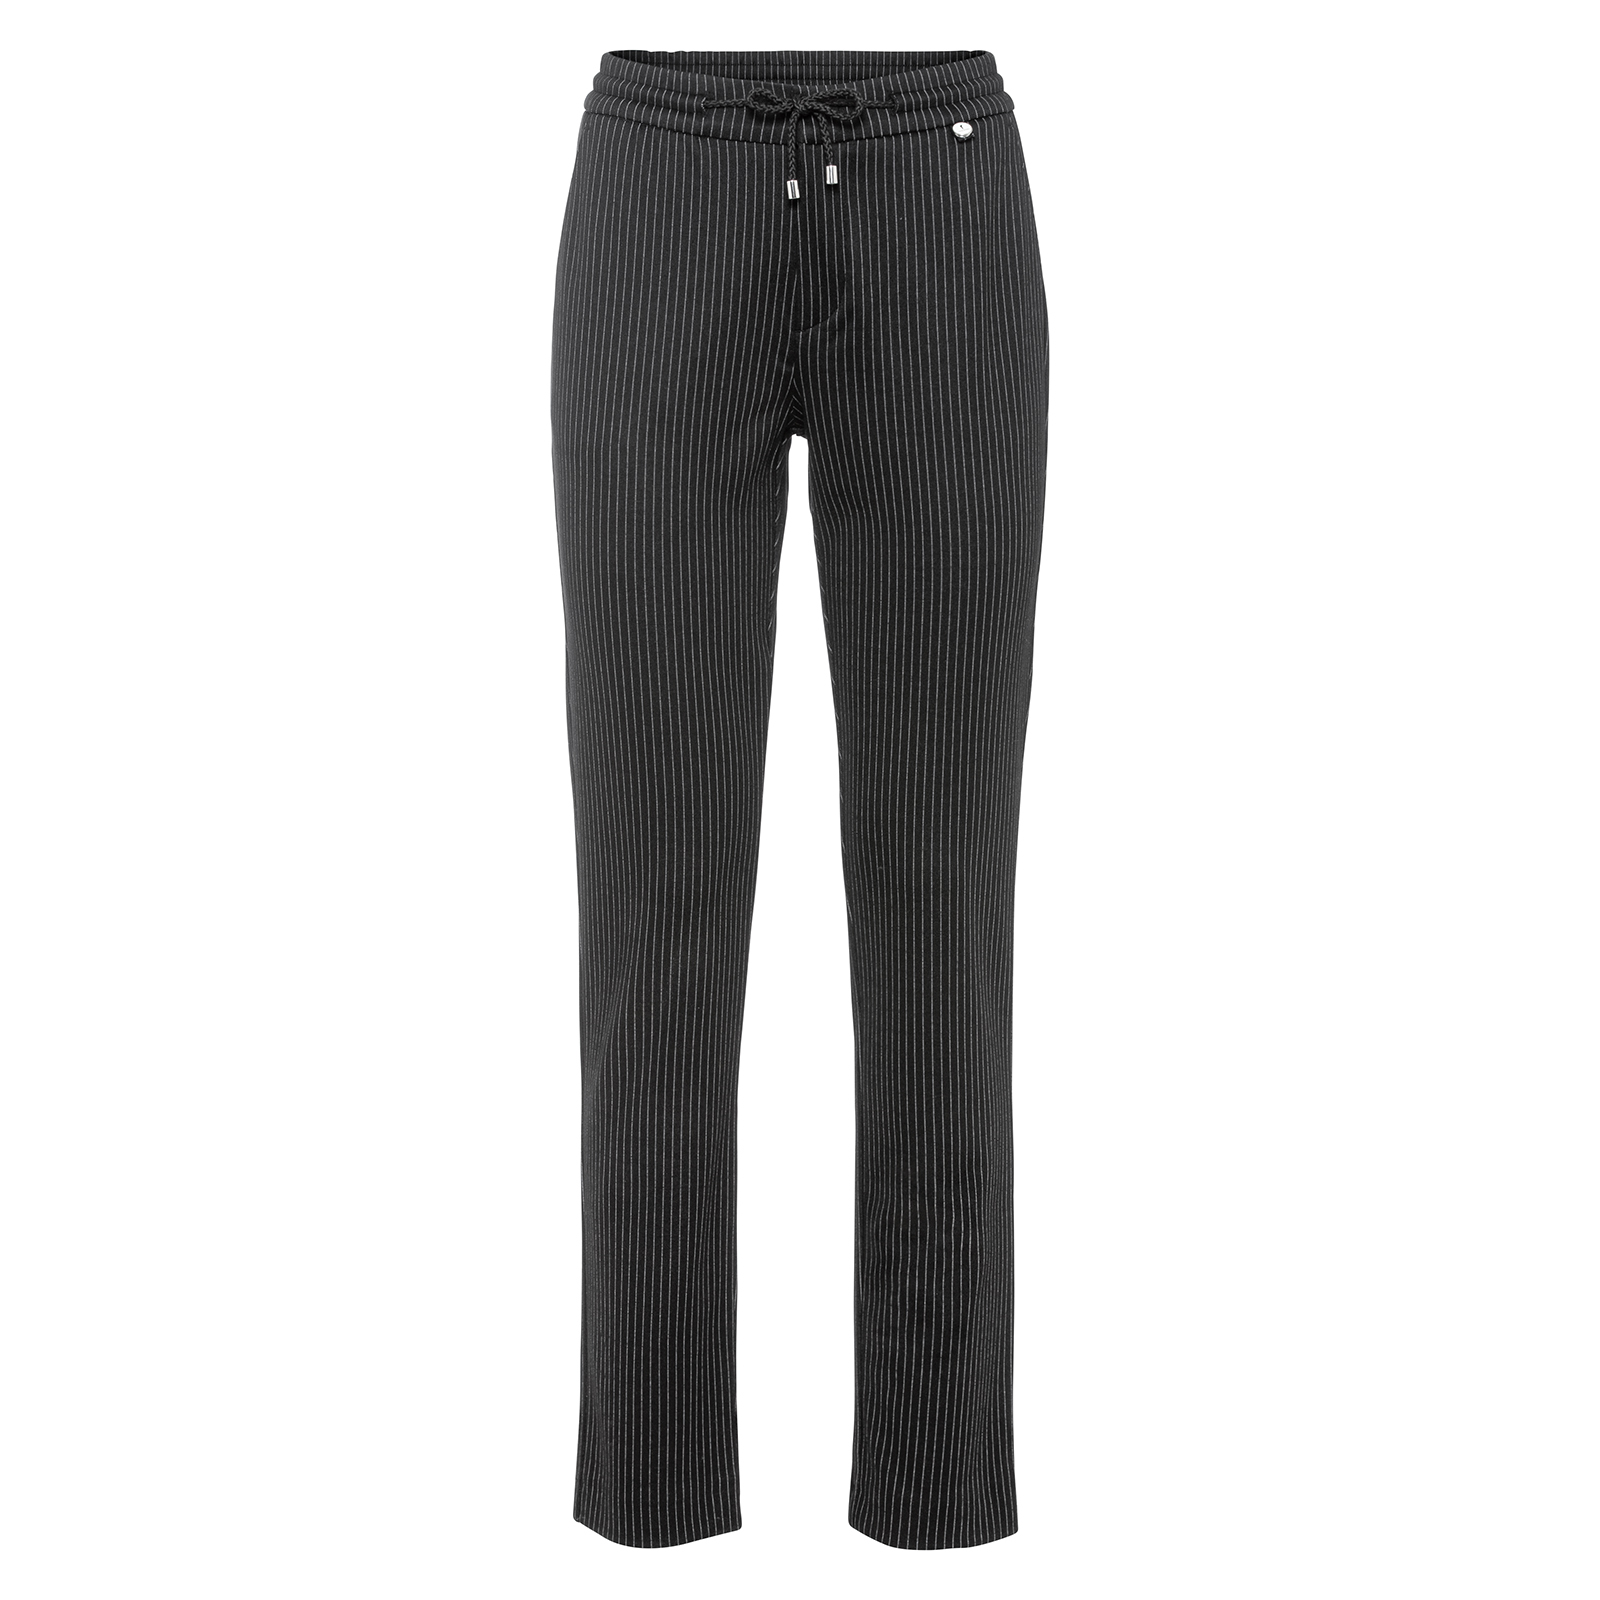 Attractive ladies' trousers 